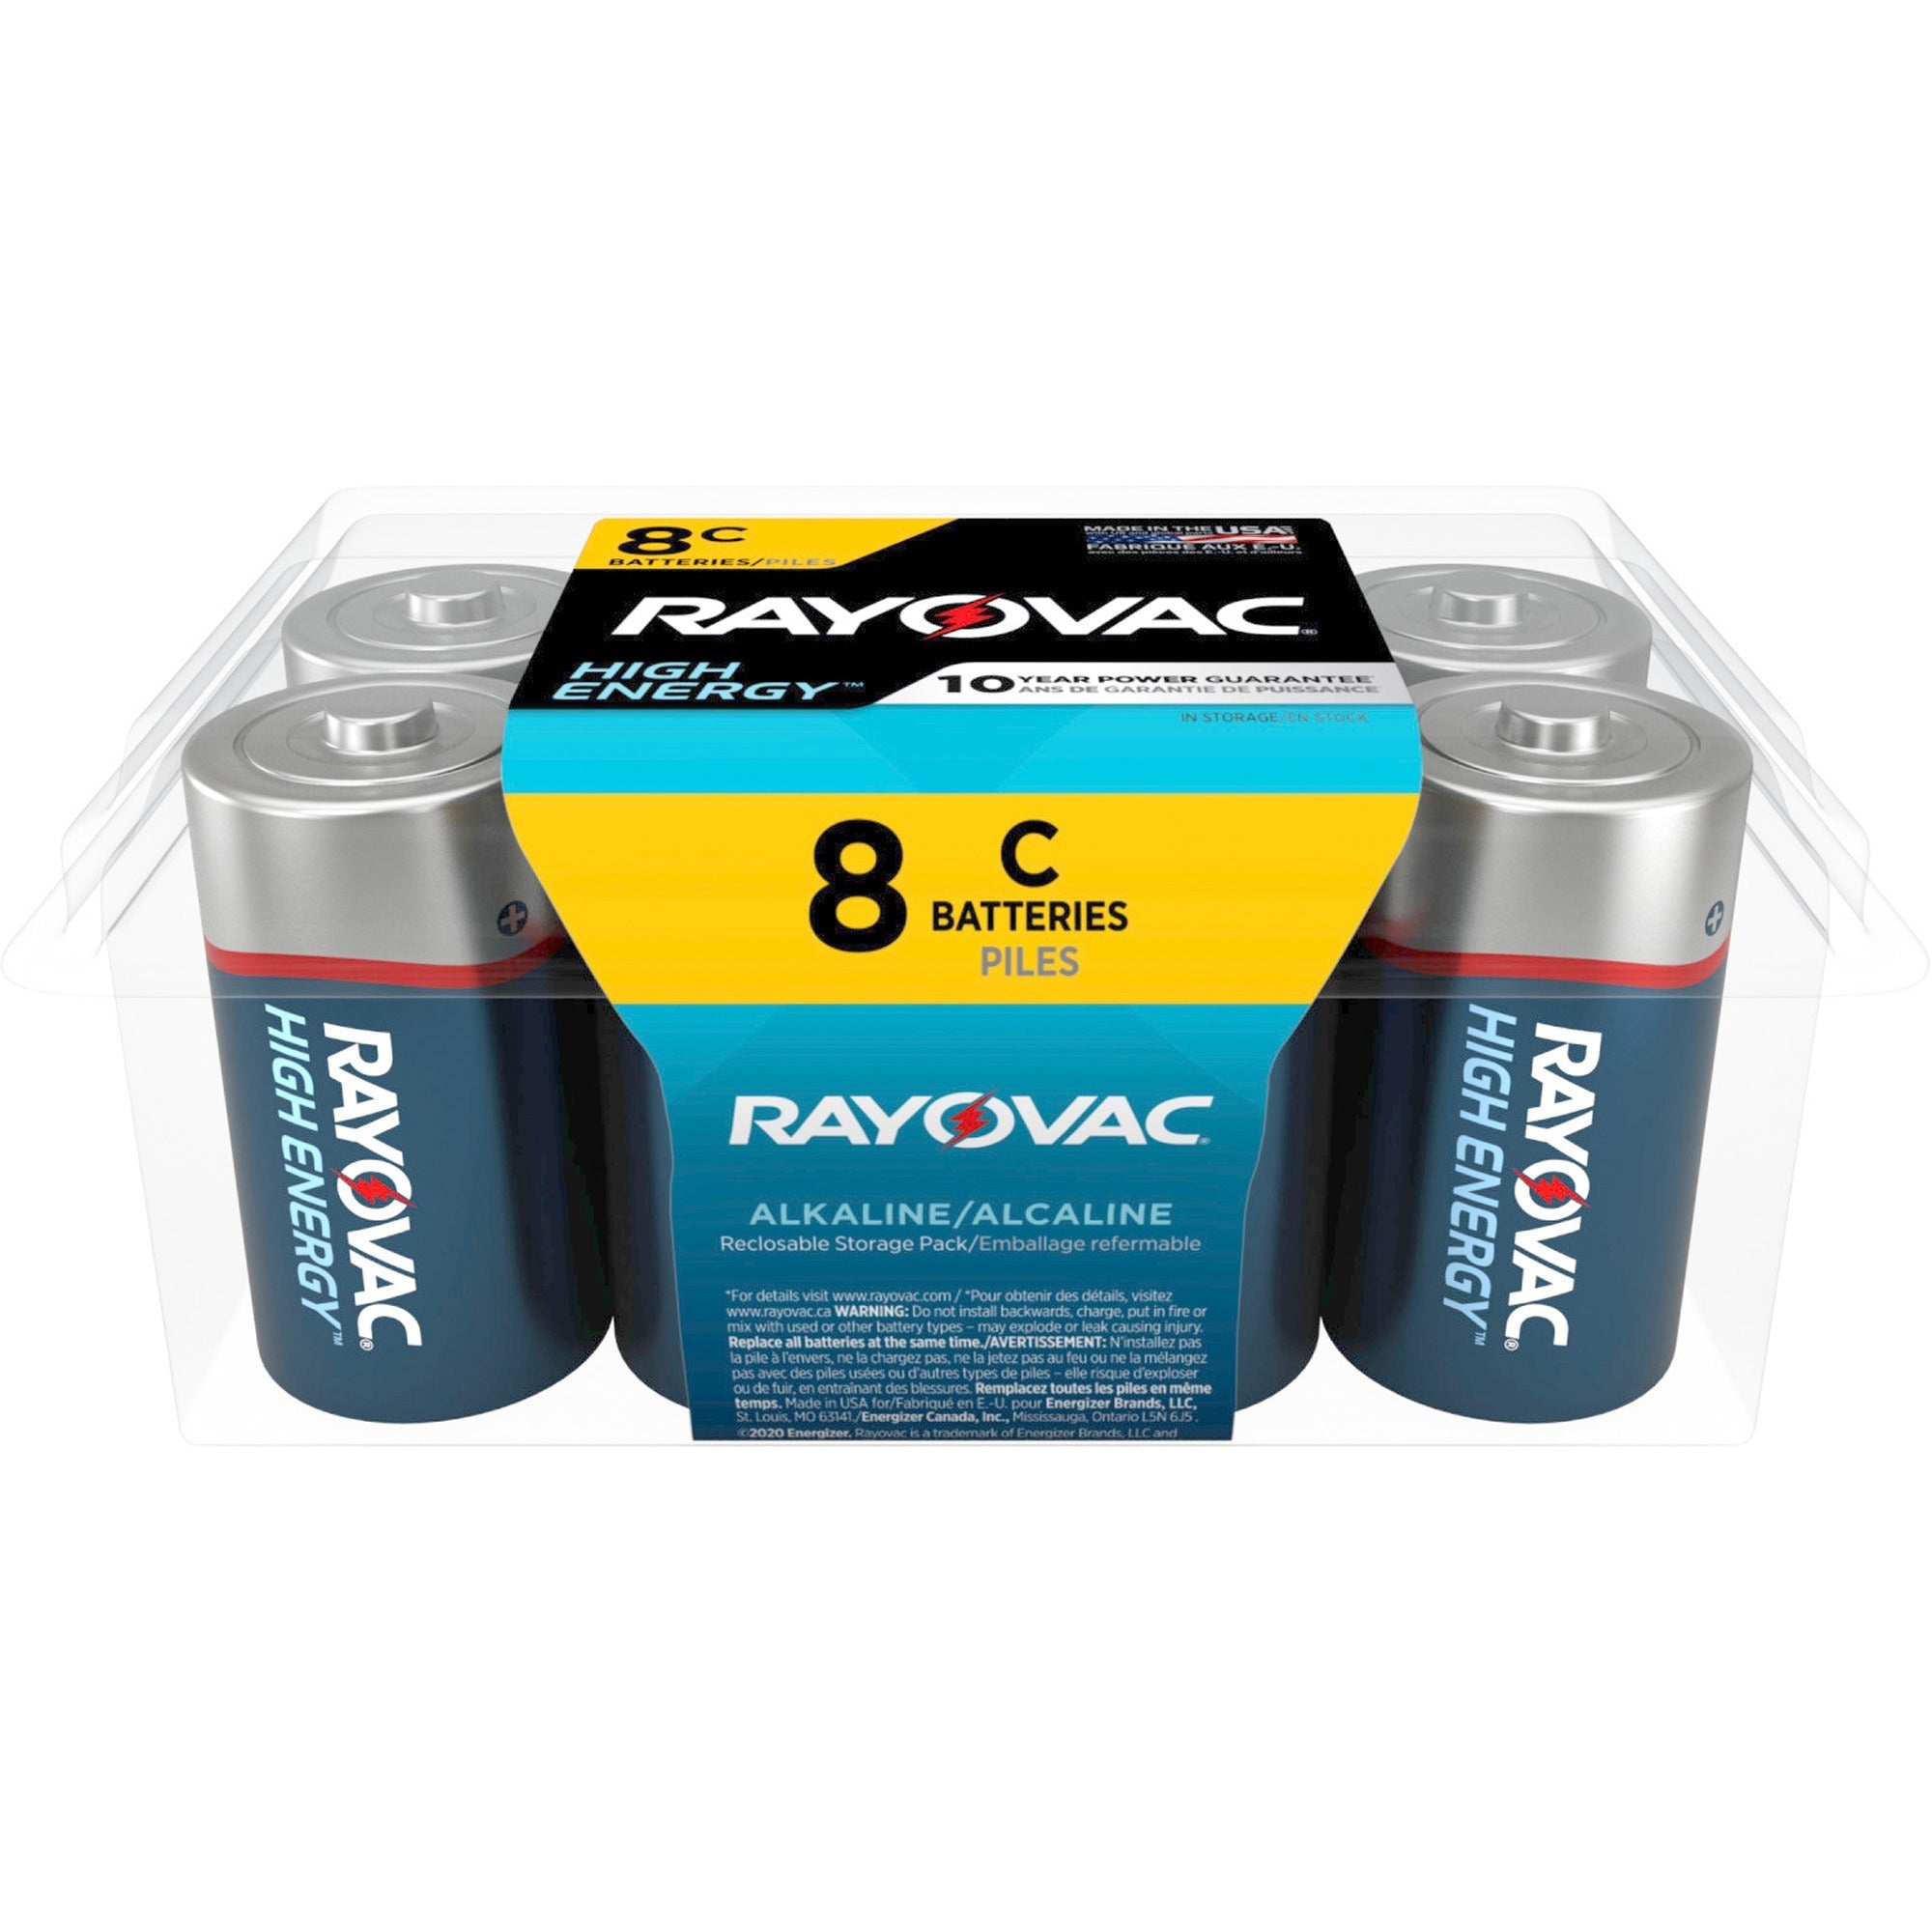 rayovac-high-energy-alkaline-c-batteries-for-drain-device-toy-flashlight-8-pack_ray8148pp - 1